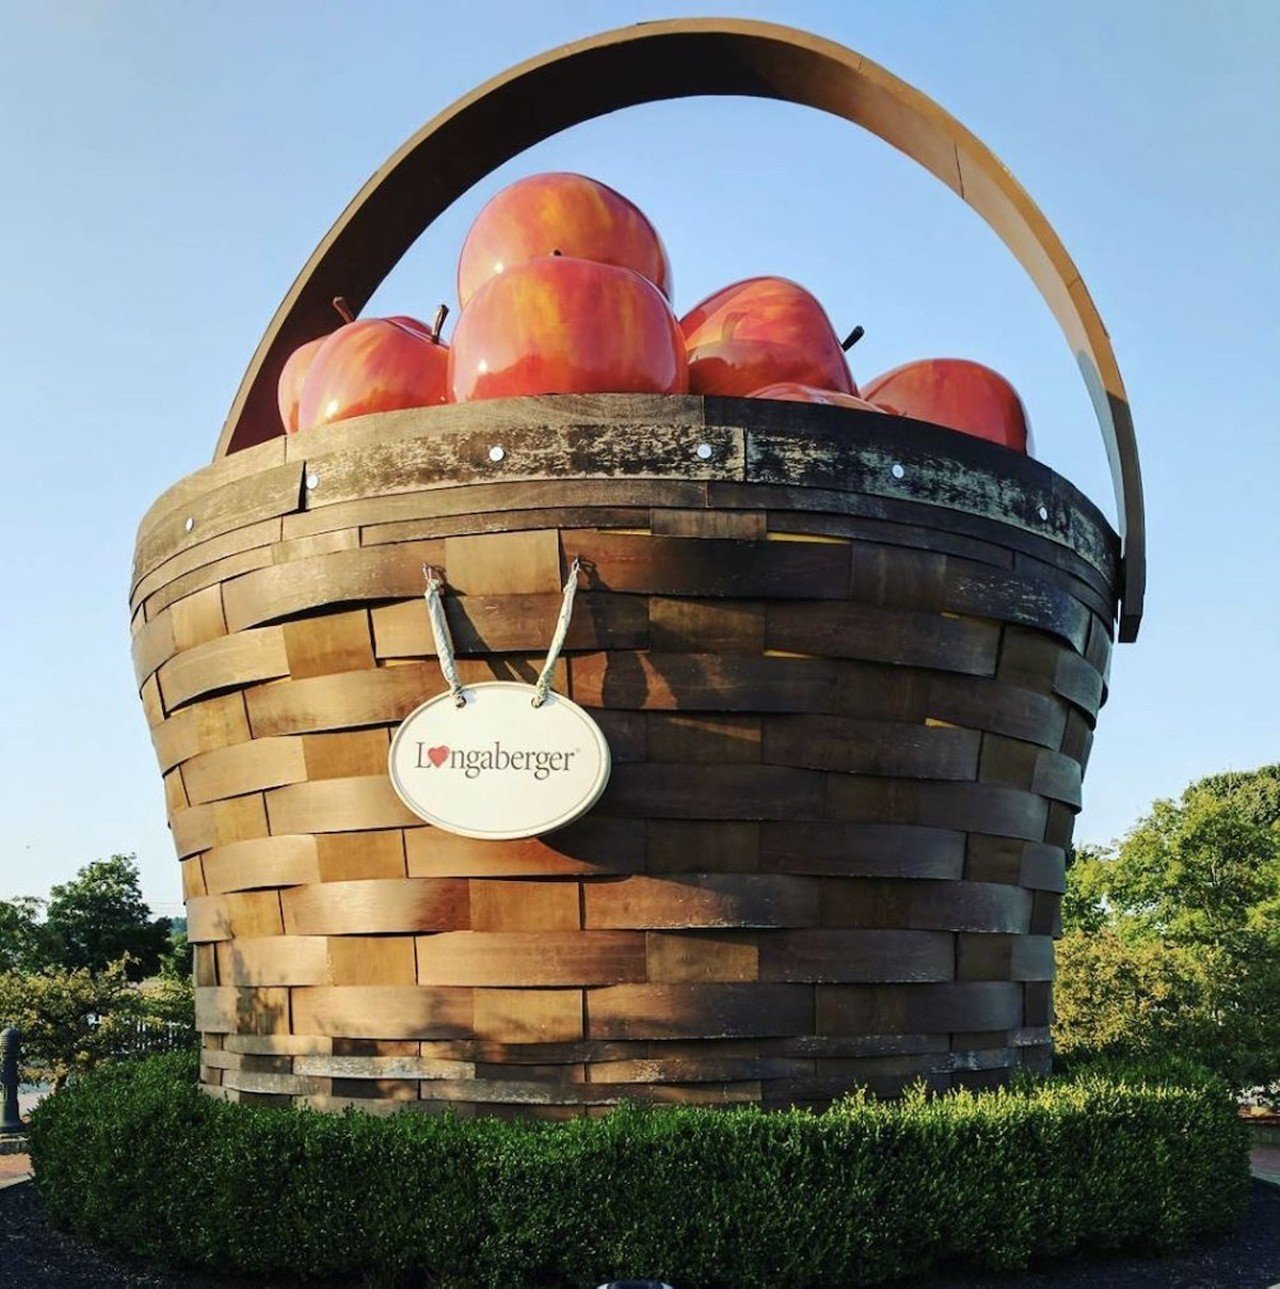 World’s Largest Basket of Apples
5563 Raiders Road, Frazeysburg
Close to the World’s Largest Basket, but much lesser known, stands the World’s Largest Basket of Apples. Also once owned by the basket company Longaberger, the basket stands close to 20 feet tall.